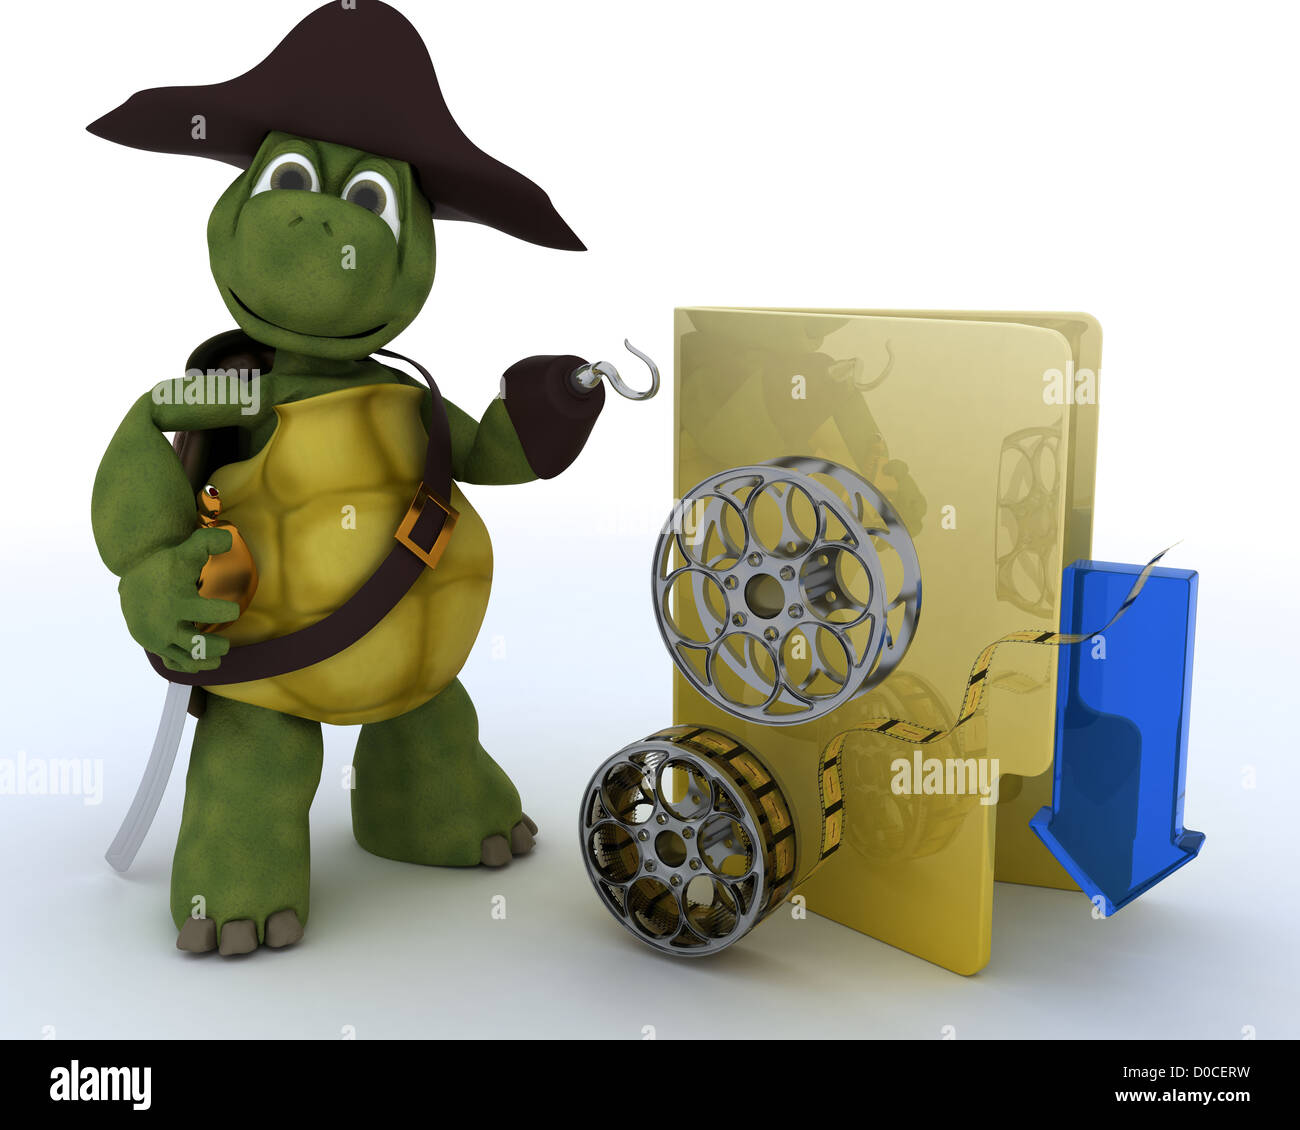 3D render of a Pirate Tortoise depicting illegal movie downloads Stock Photo